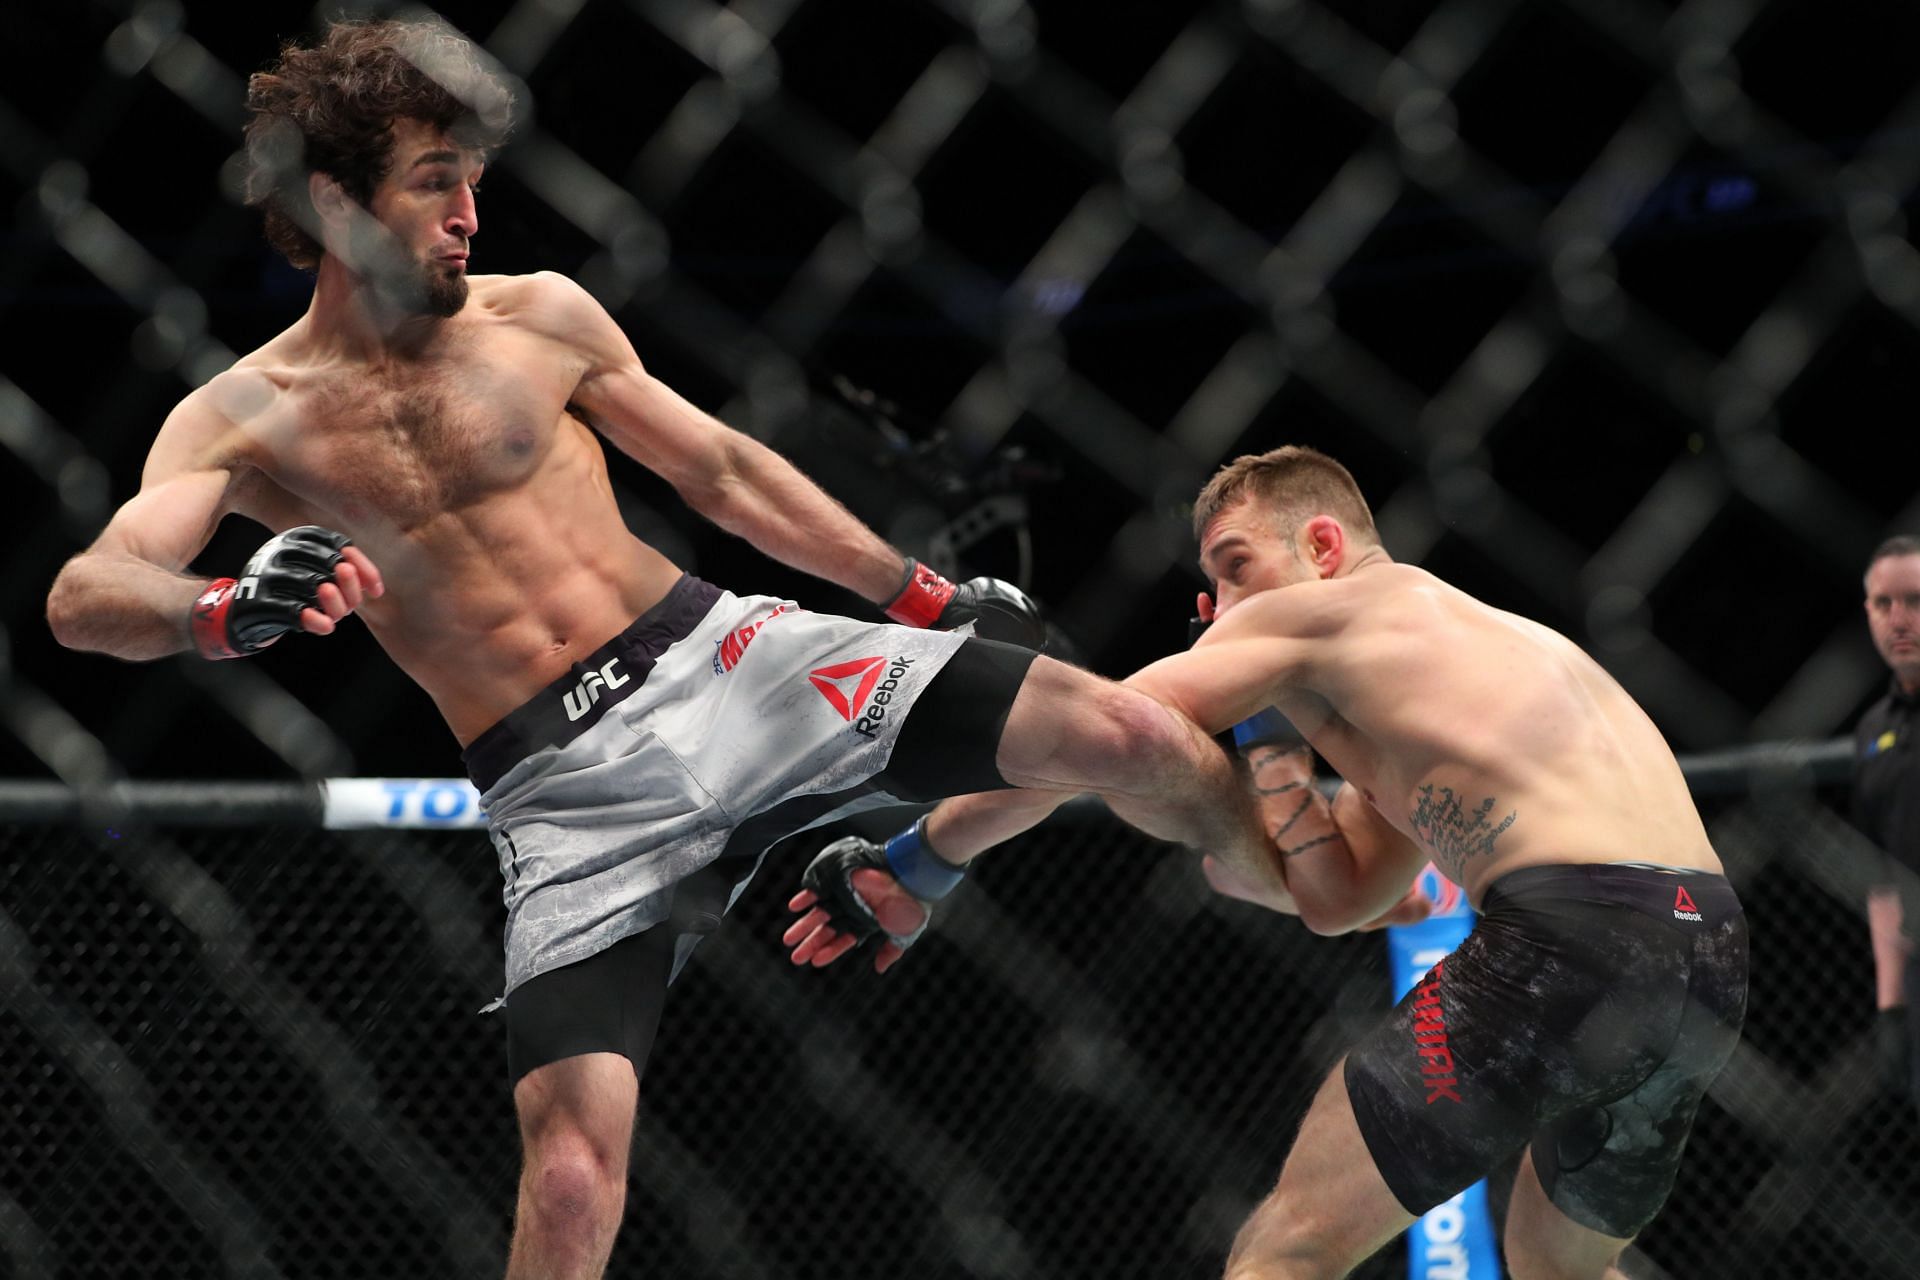 If Zabit Magomedsharipov returns in the same form that he left off with, he could definitely capture featherweight gold